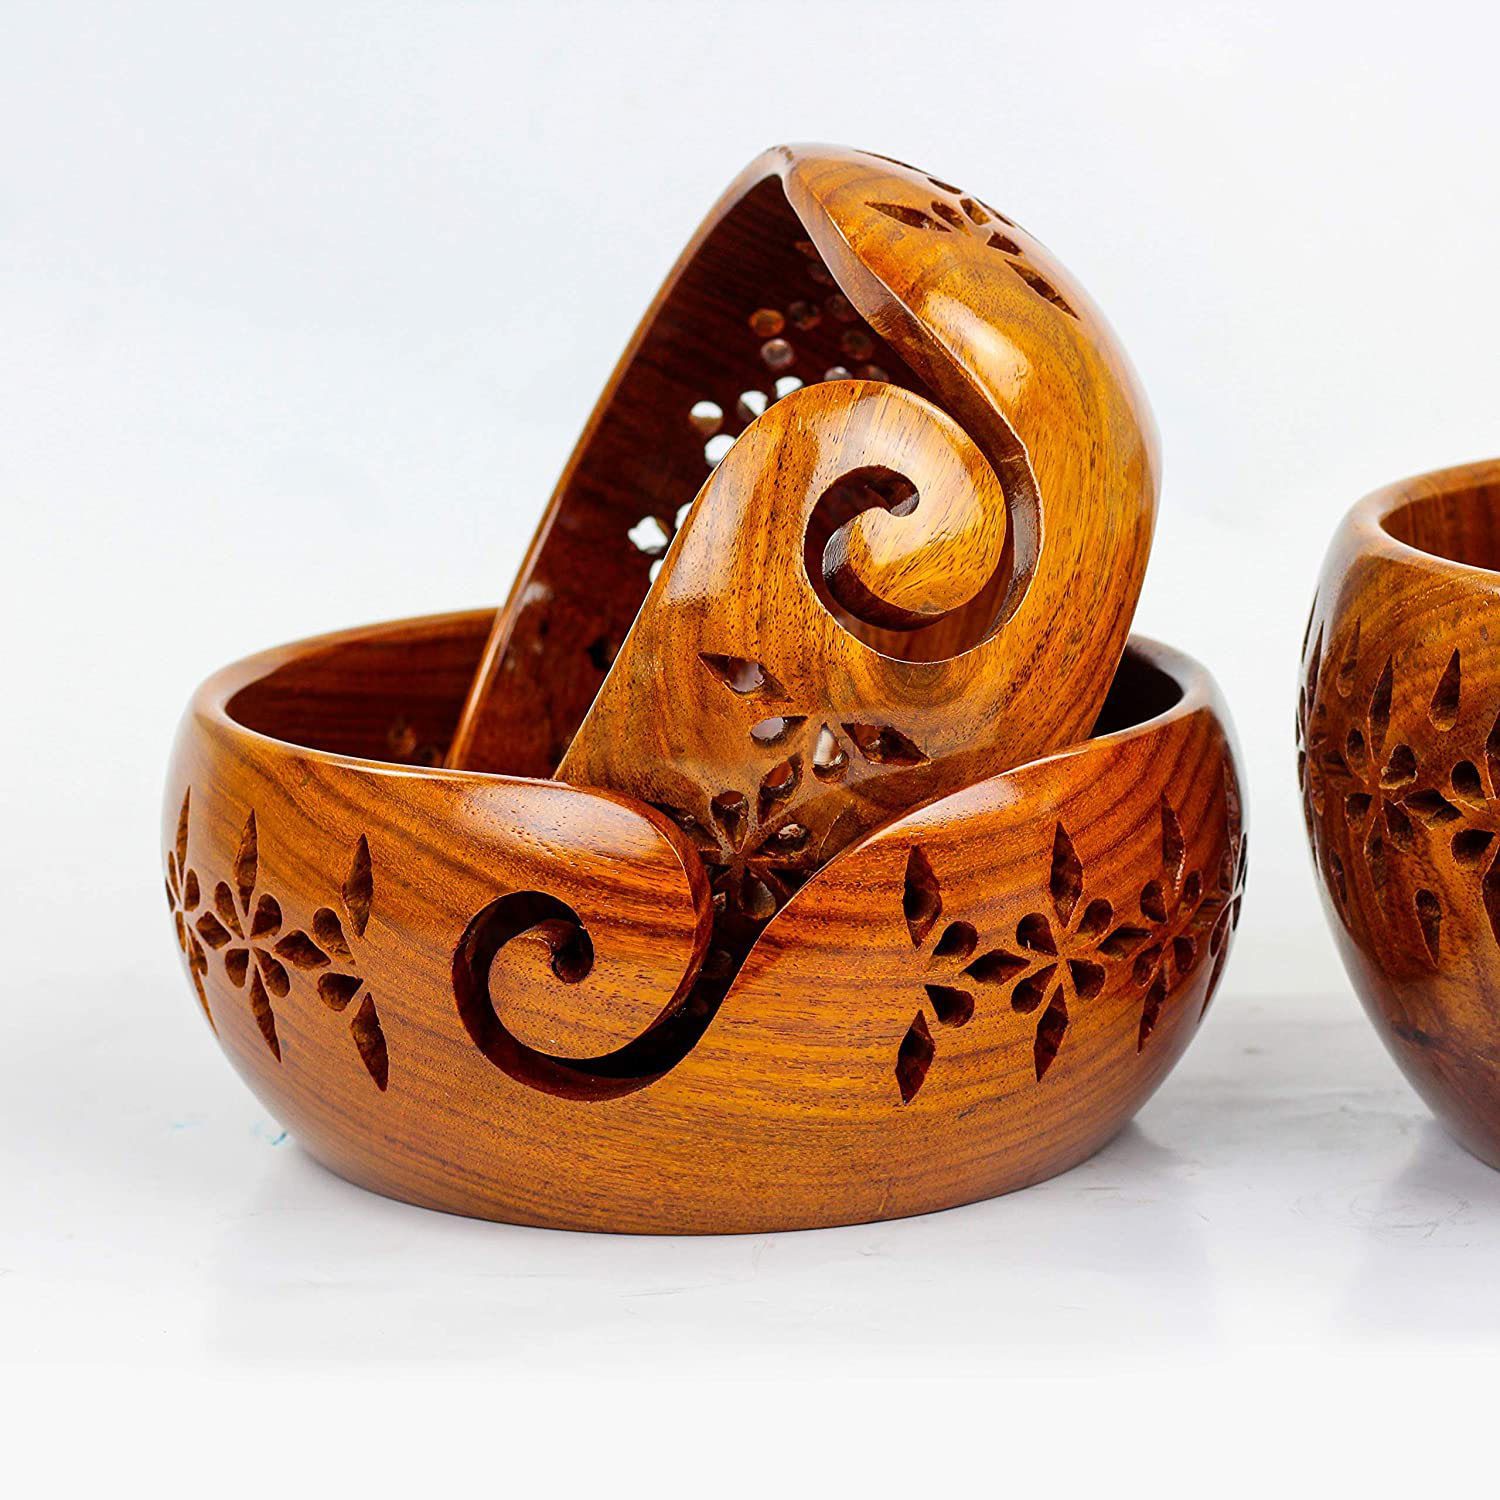 Handmade Rosewood Premium Yarn Bowl with Fancy Carved Grills | Knitting & Crochet Accessories